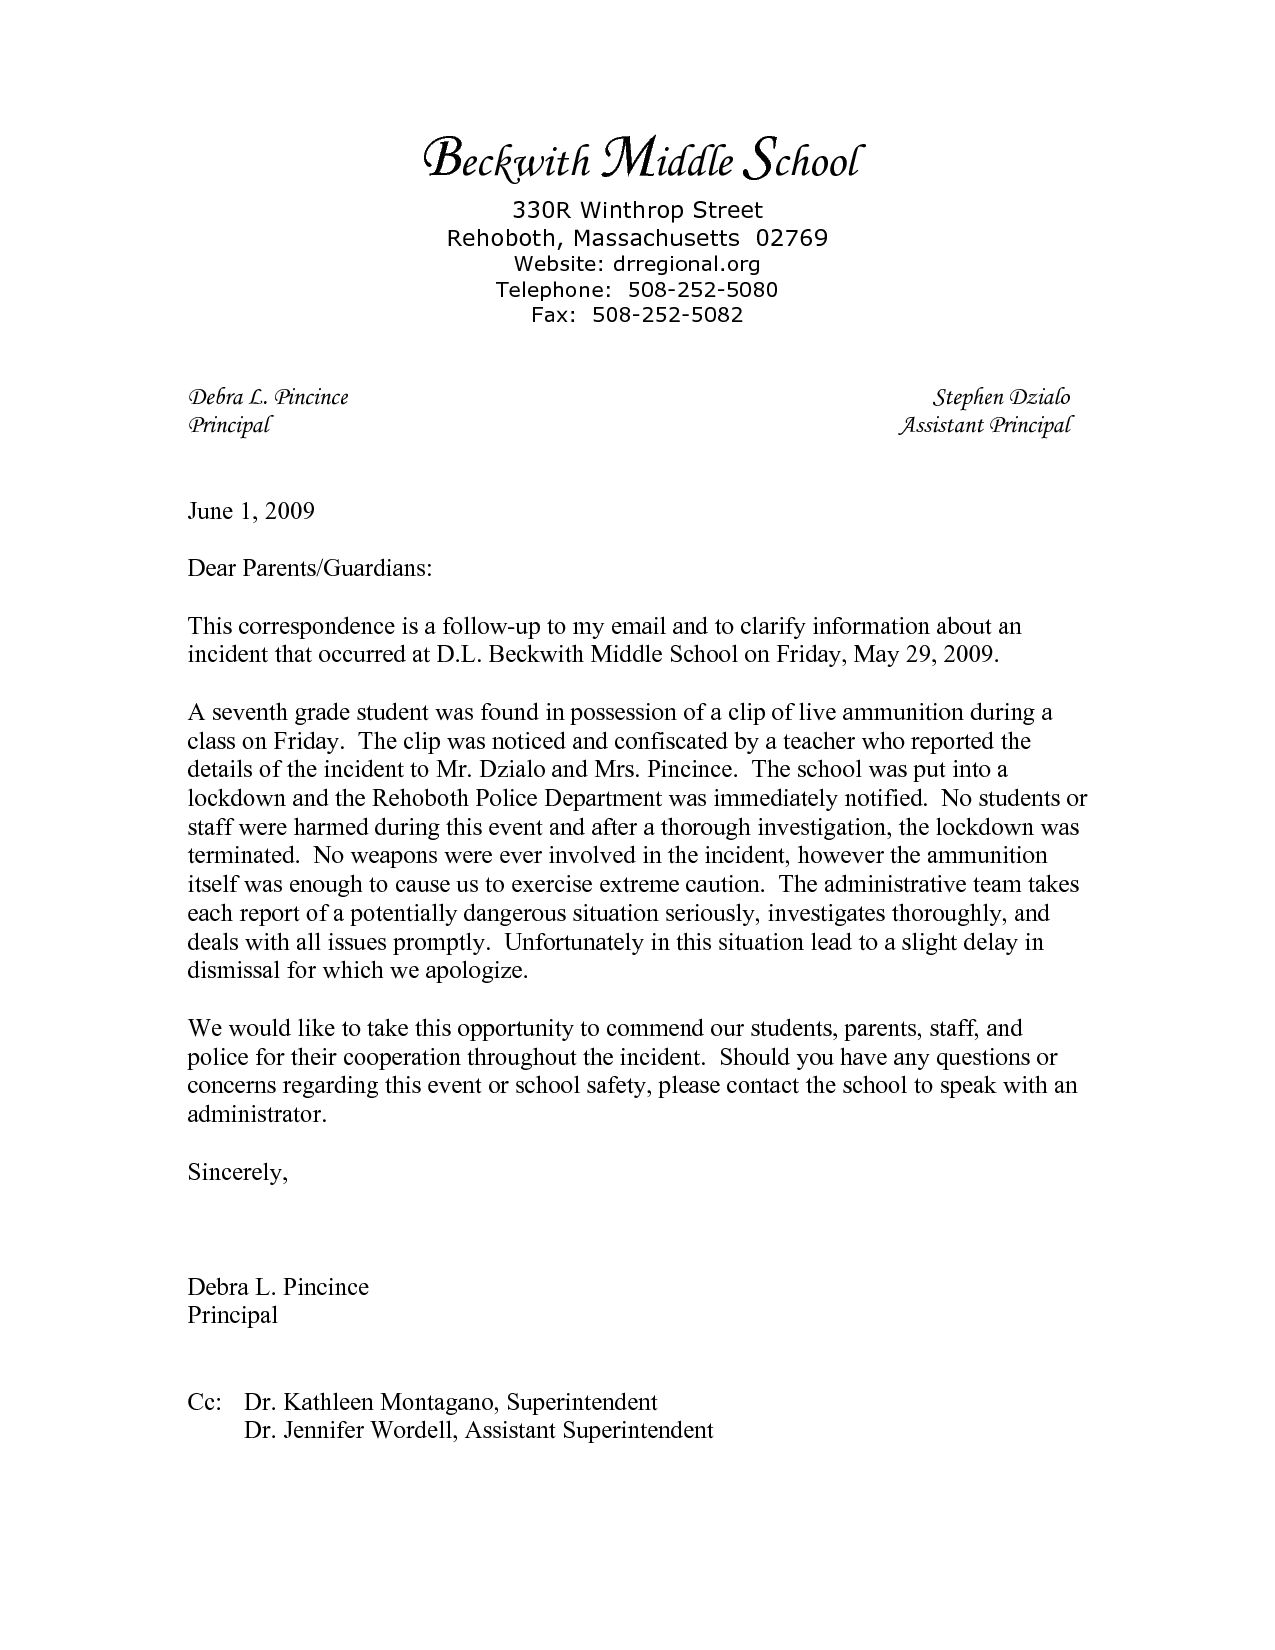 Sample Of Incident Report Letter In School – Yahoo Image Intended For School Incident Report Template